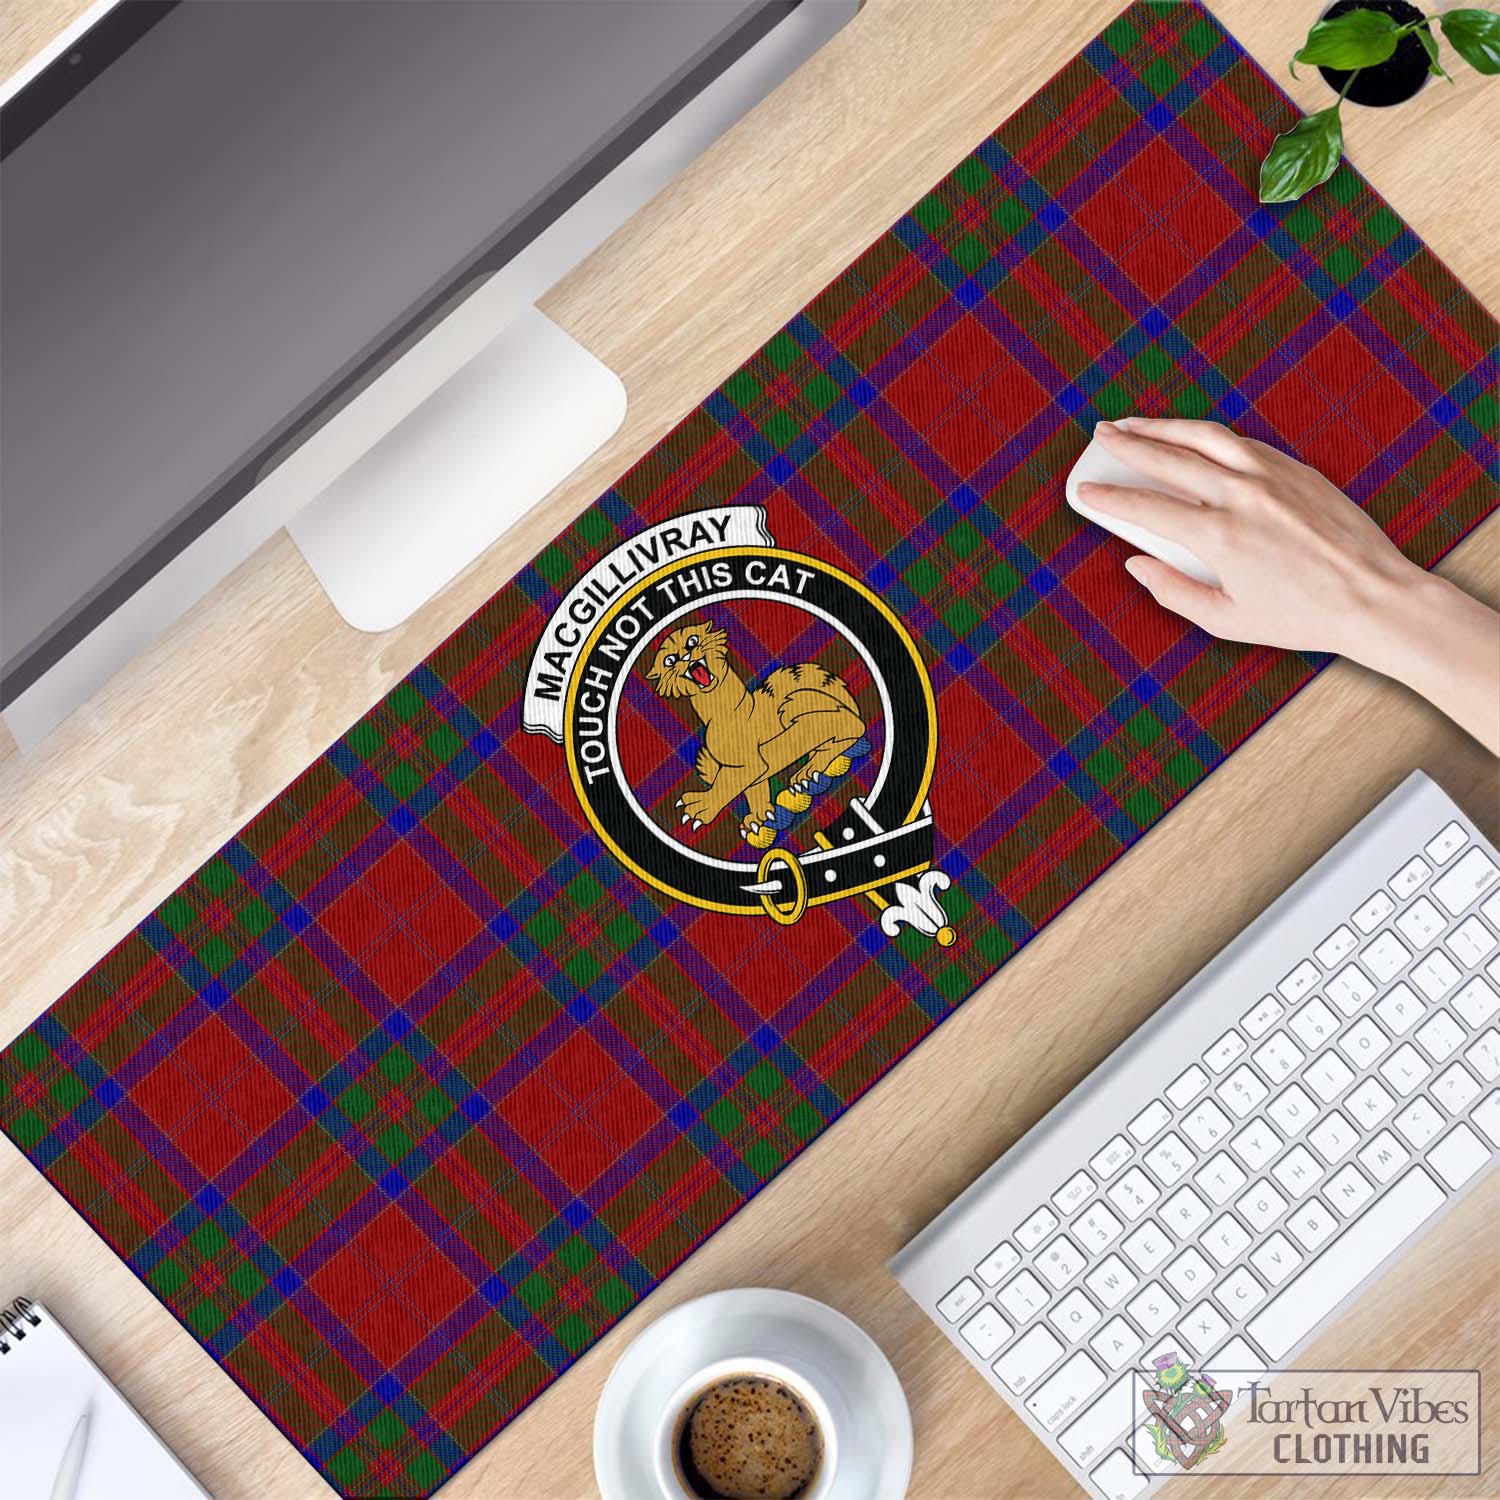 Tartan Vibes Clothing MacGillivray Tartan Mouse Pad with Family Crest